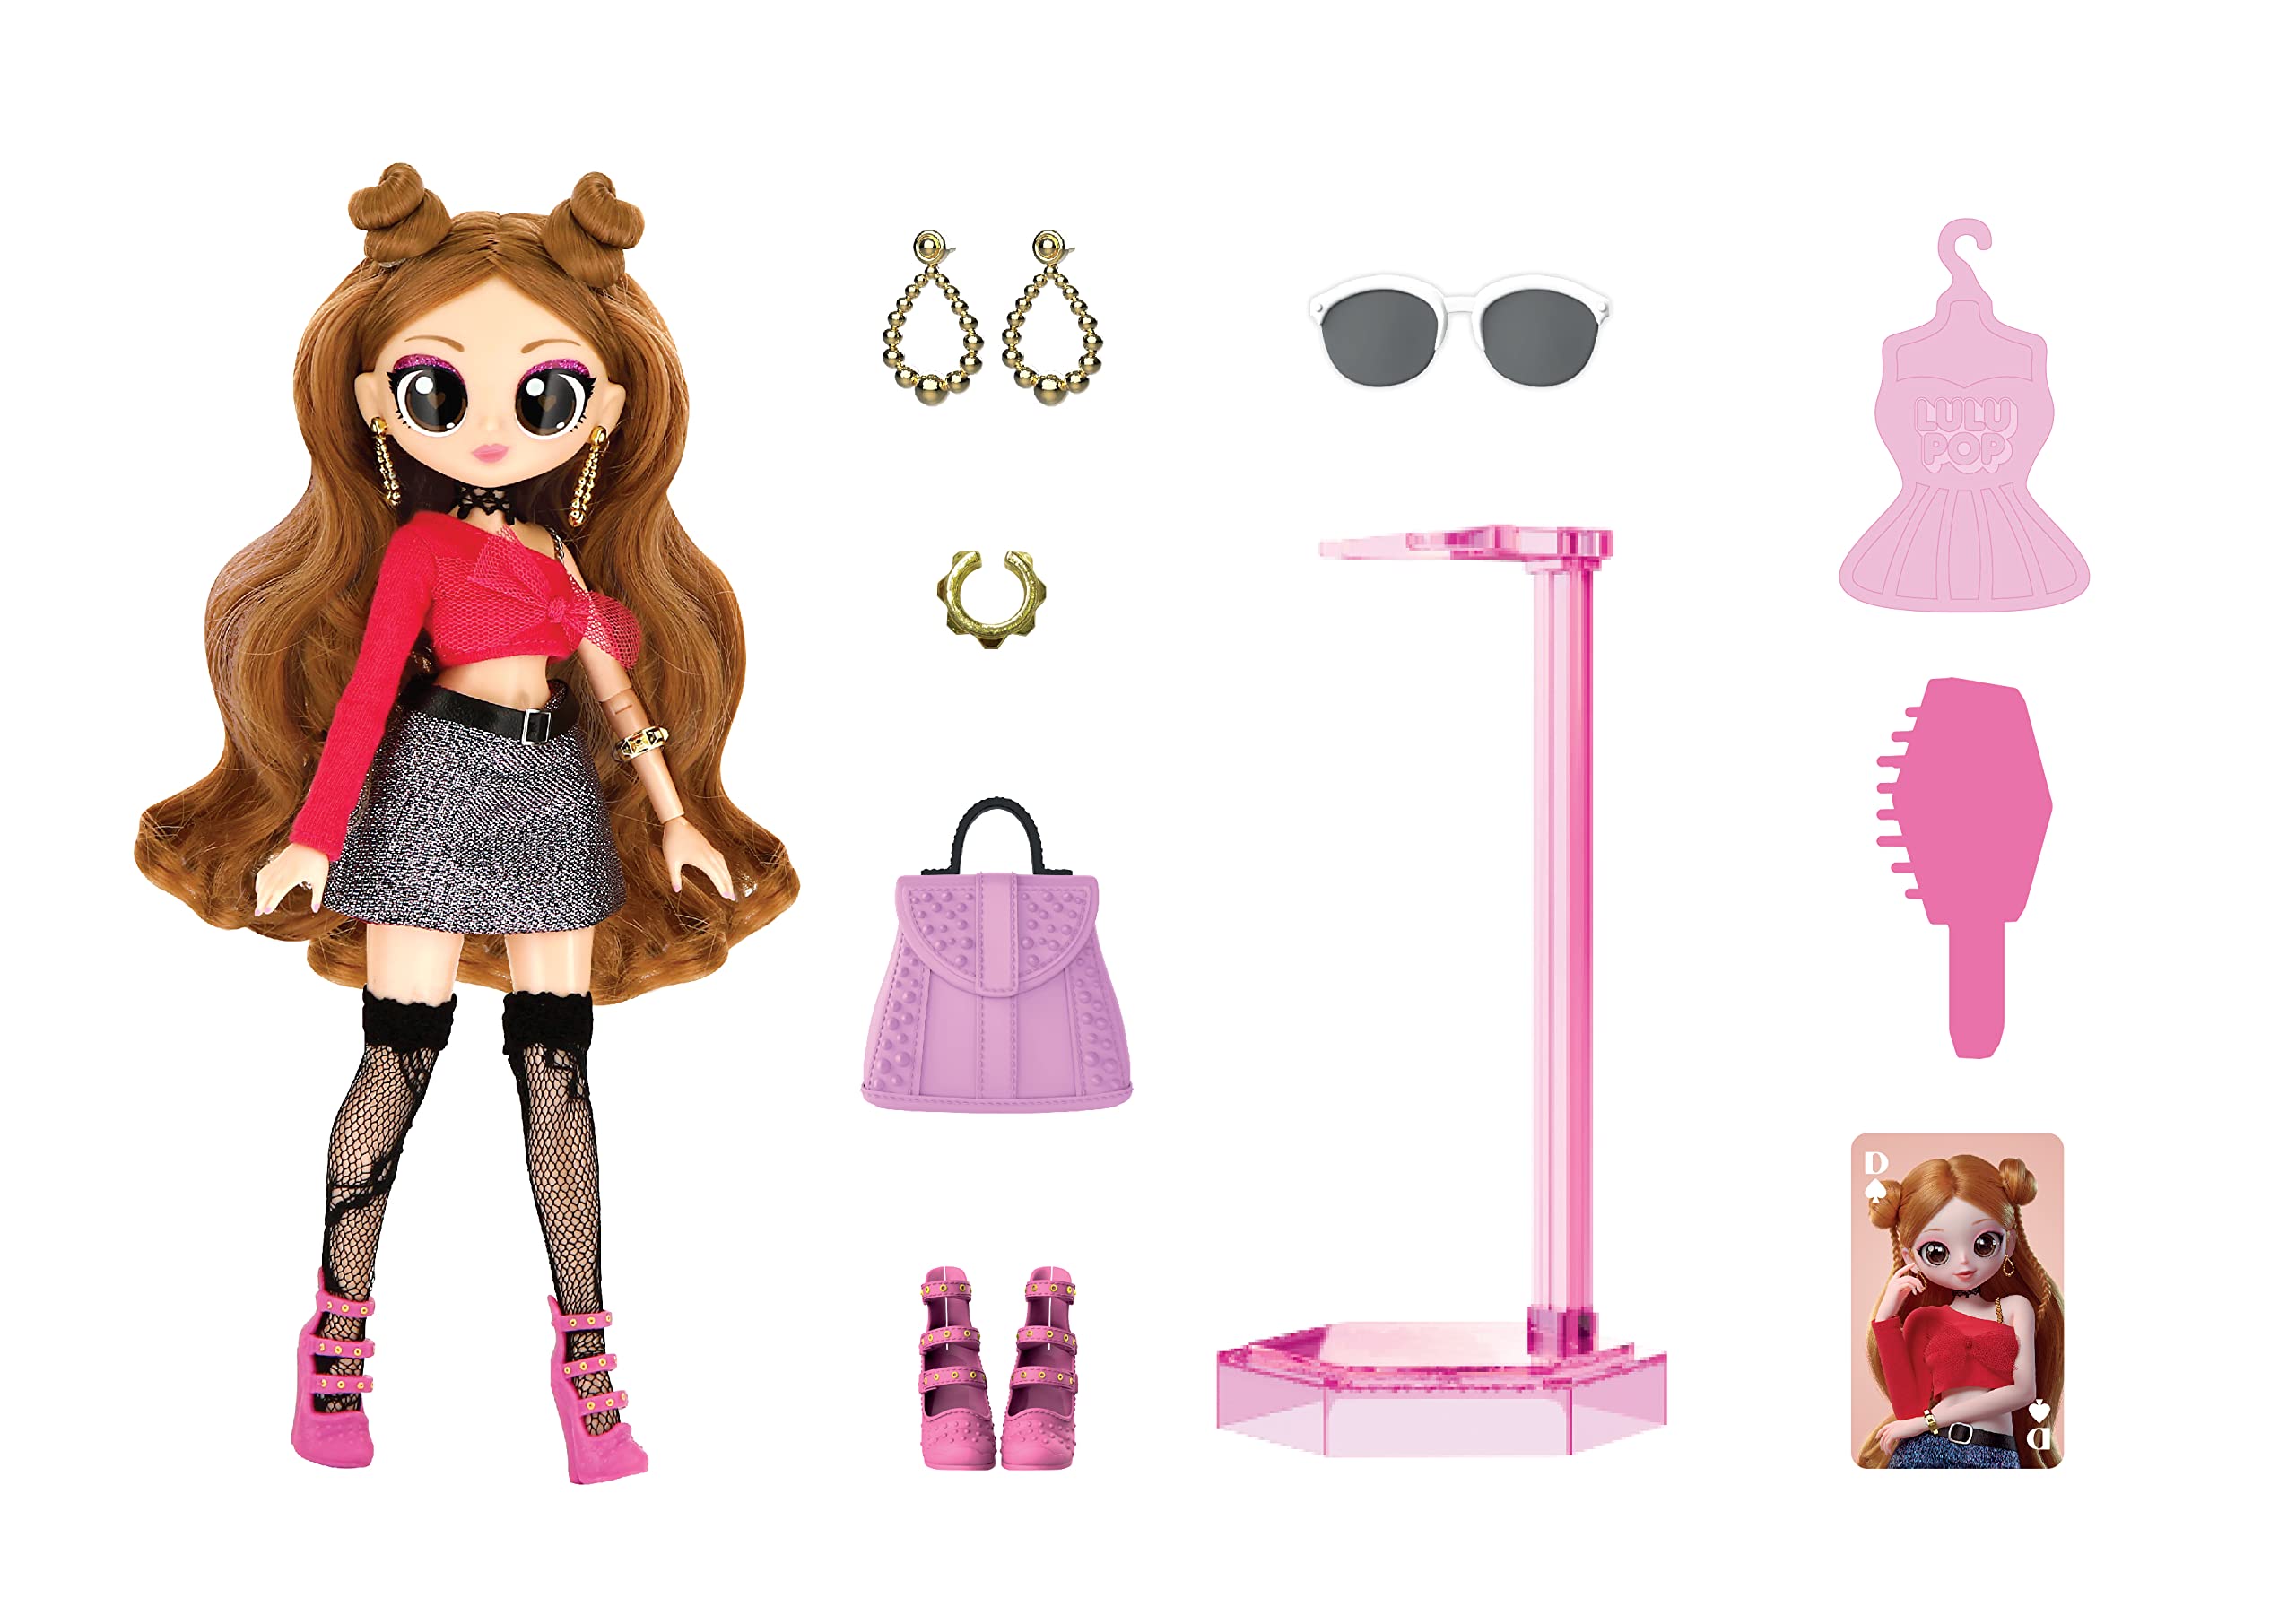 LULUPOP Daisy Ella K-pop Fashion Doll with Stand & Accessories Including Purse, Earrings, Sunglasses, Heels, Brush & More, Toy for Girls 3 Years Old and Up